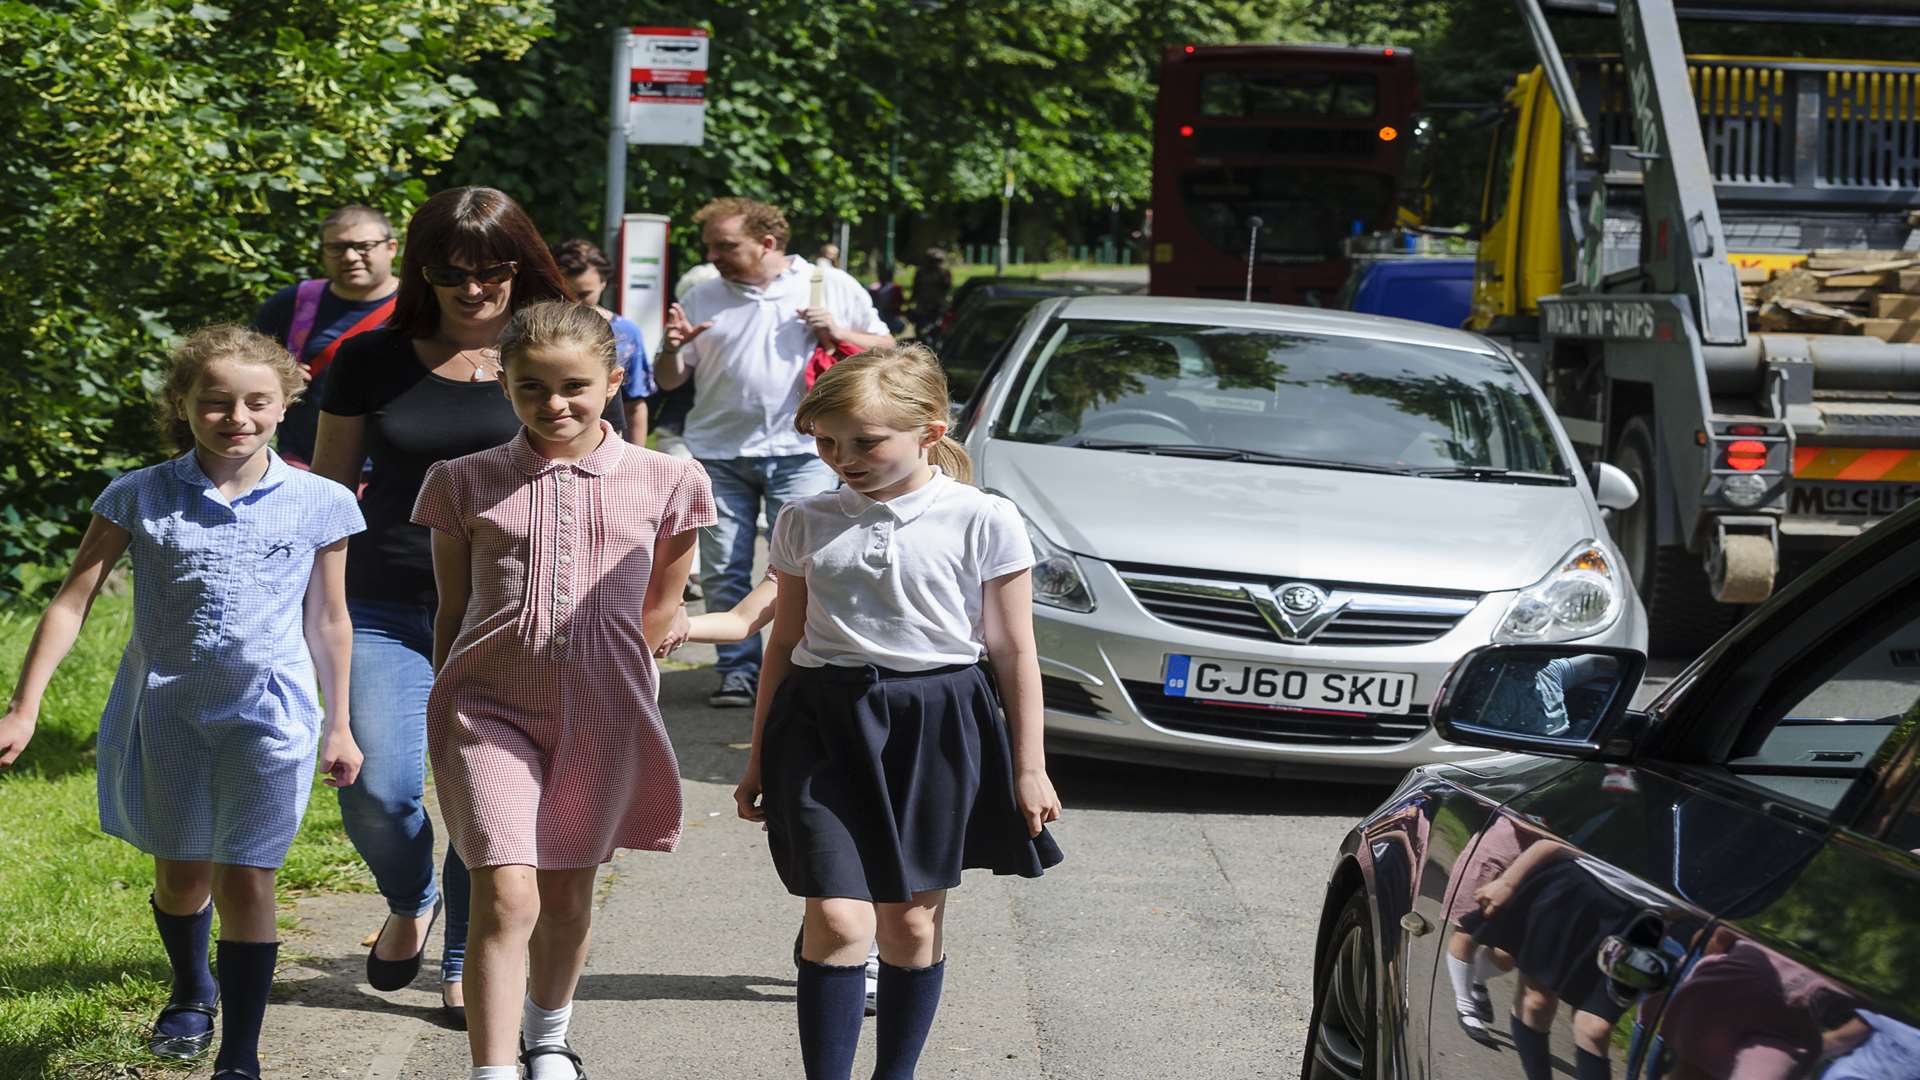 Livia Wright, 10, Lillia, DeBuc, 10, and Ellie Meagan, 10, walking down from the primary school past cars parked on the pavement.